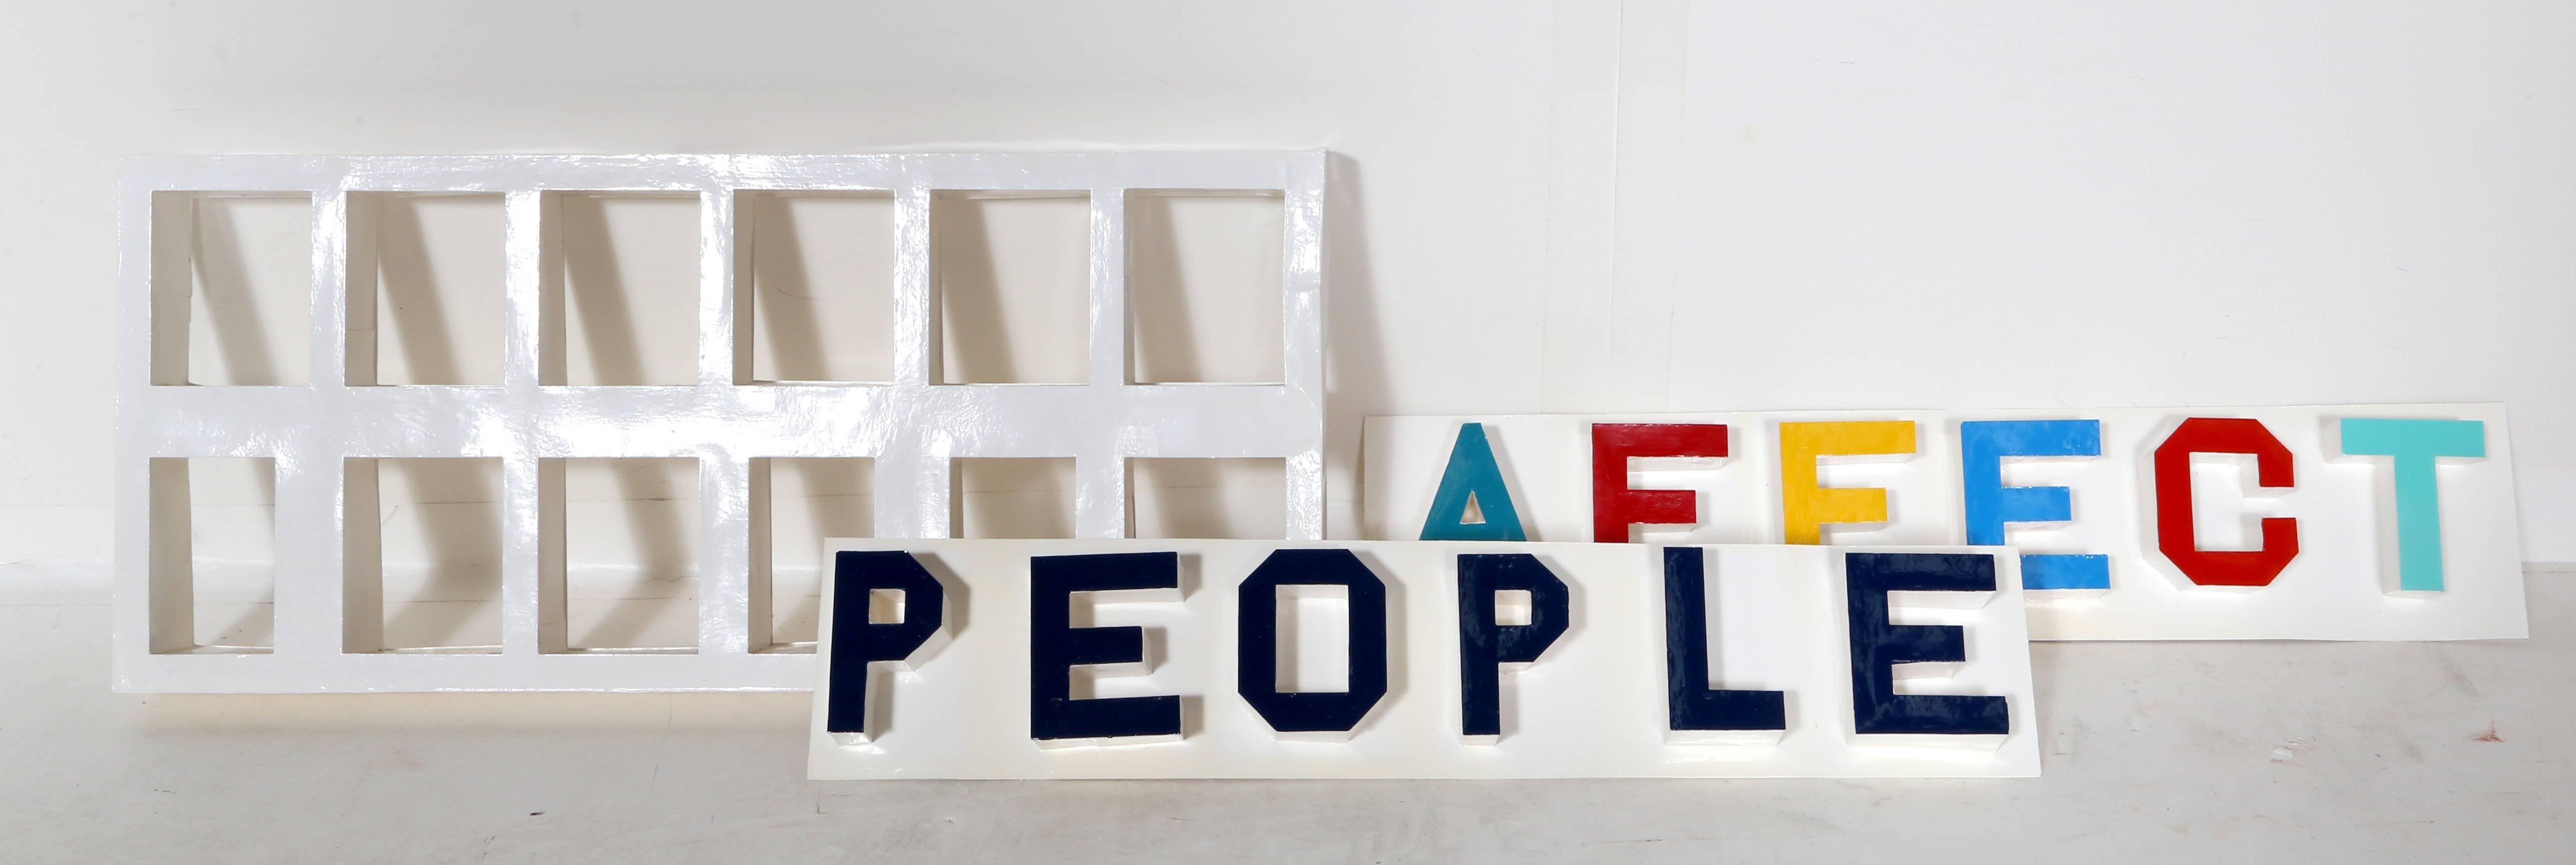 Effect People - Affect People, Text Art Mixed Media Sculpture by Chris Caccamise For Sale 3